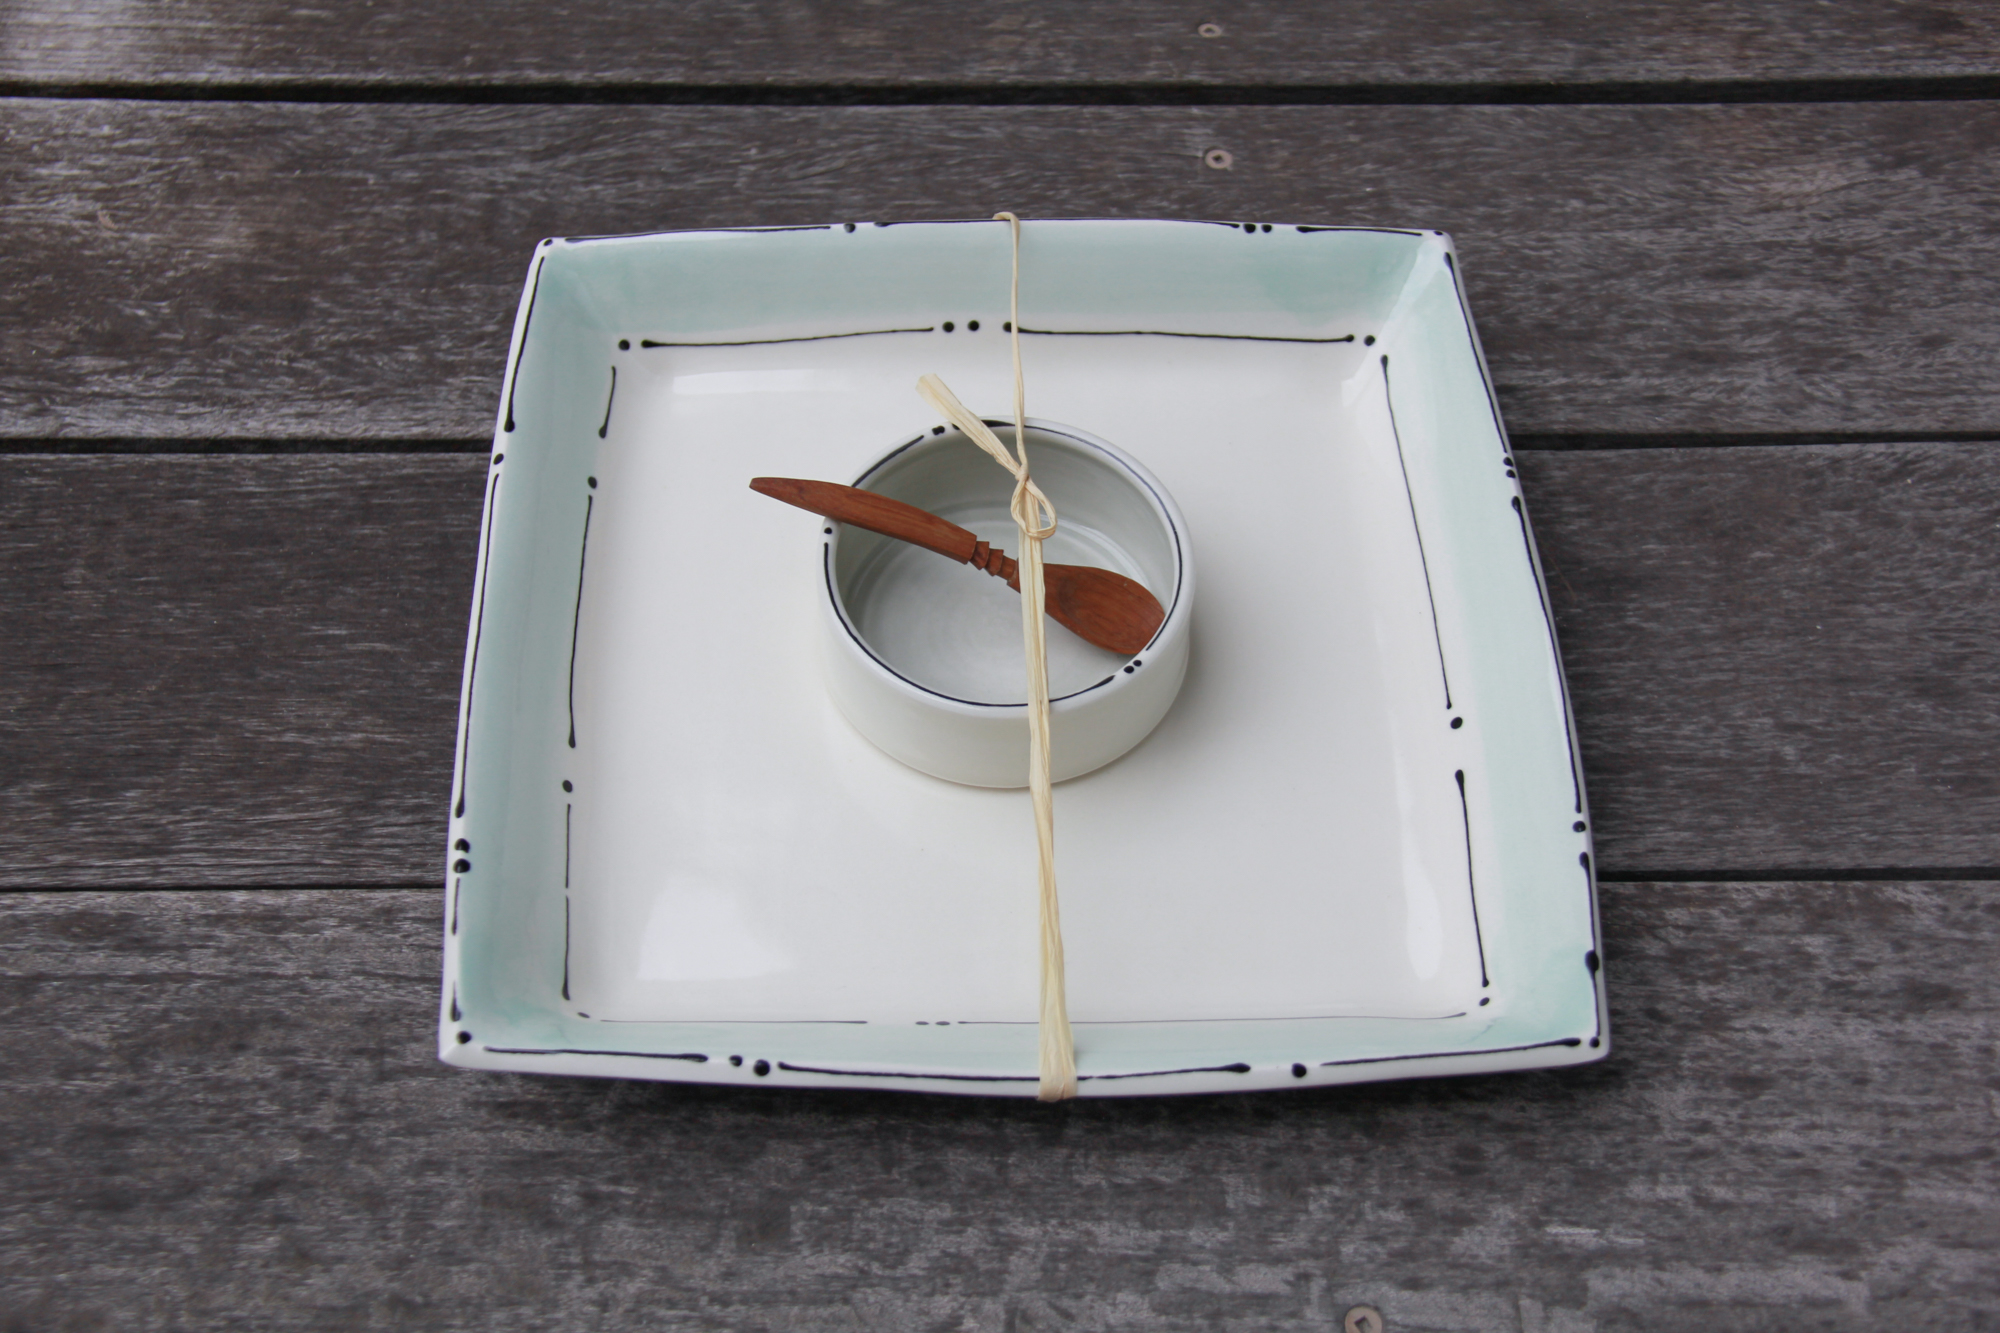 Iris Dorton: Medium Tray with Circle Dot Line Motif, comes with Wood Spoon and Dish Product Image 8 of 11